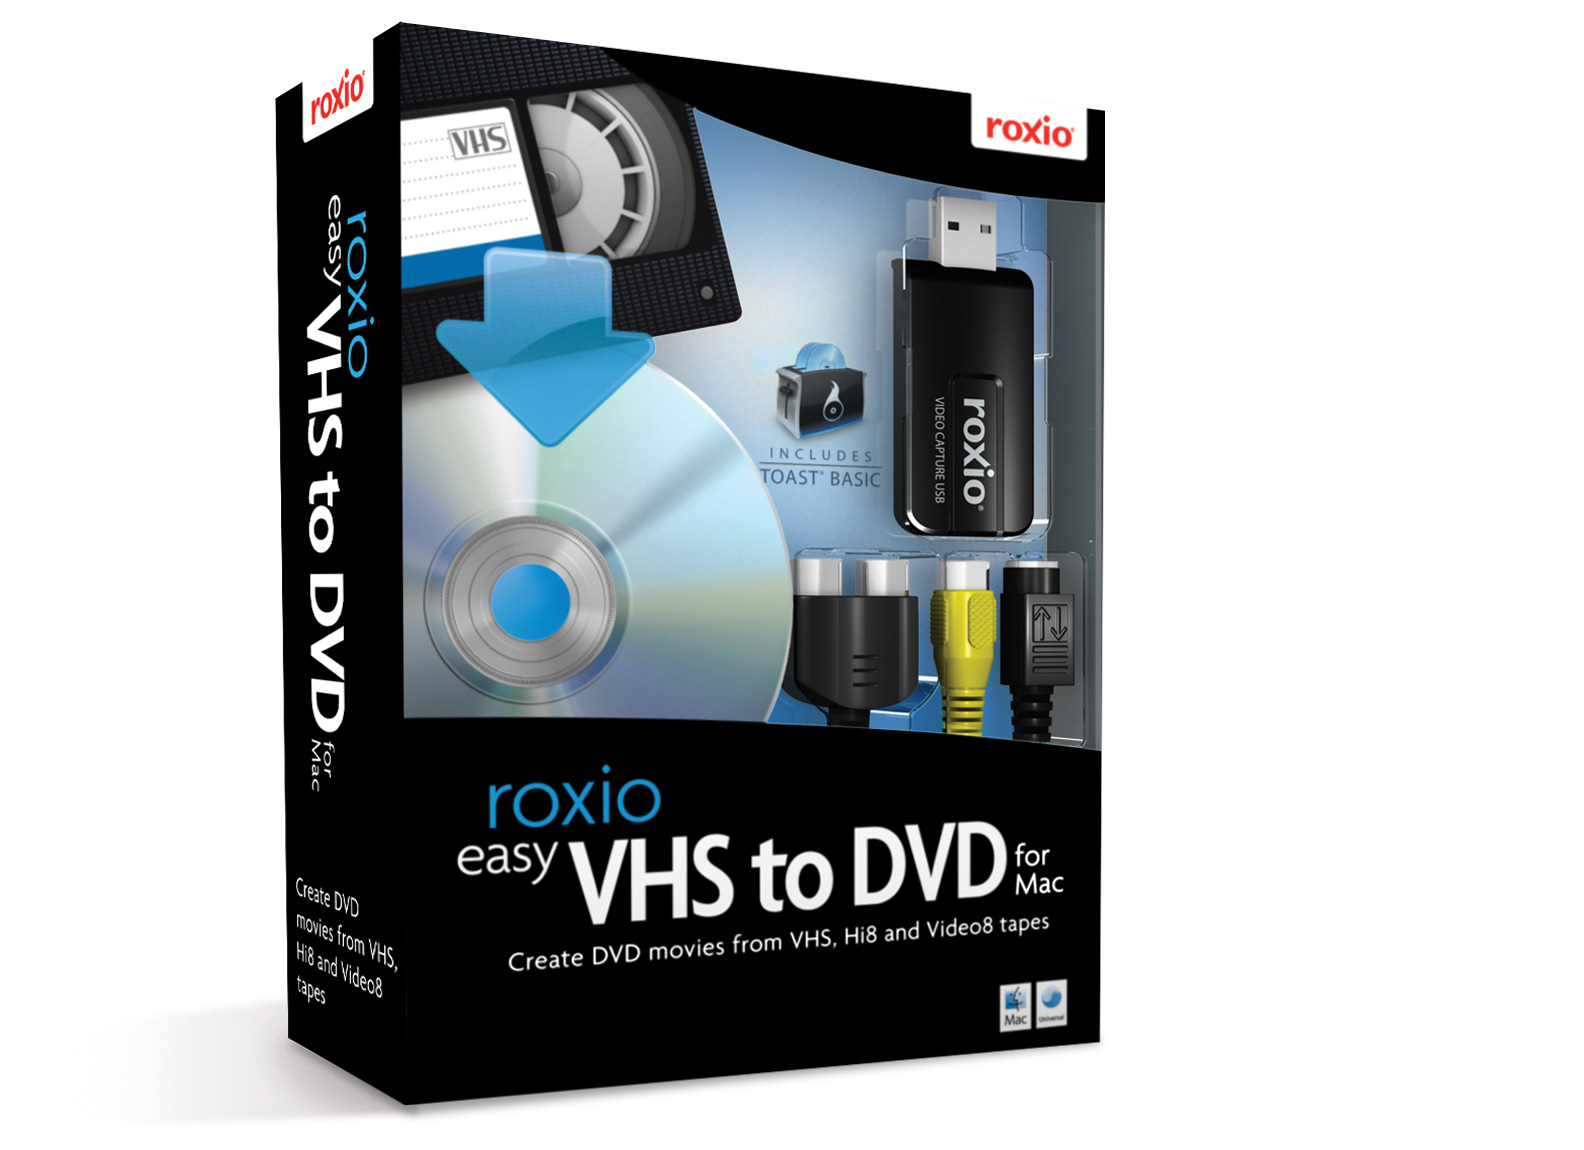 Roxio - Easy VHS to DVD for Mac Product Imagery